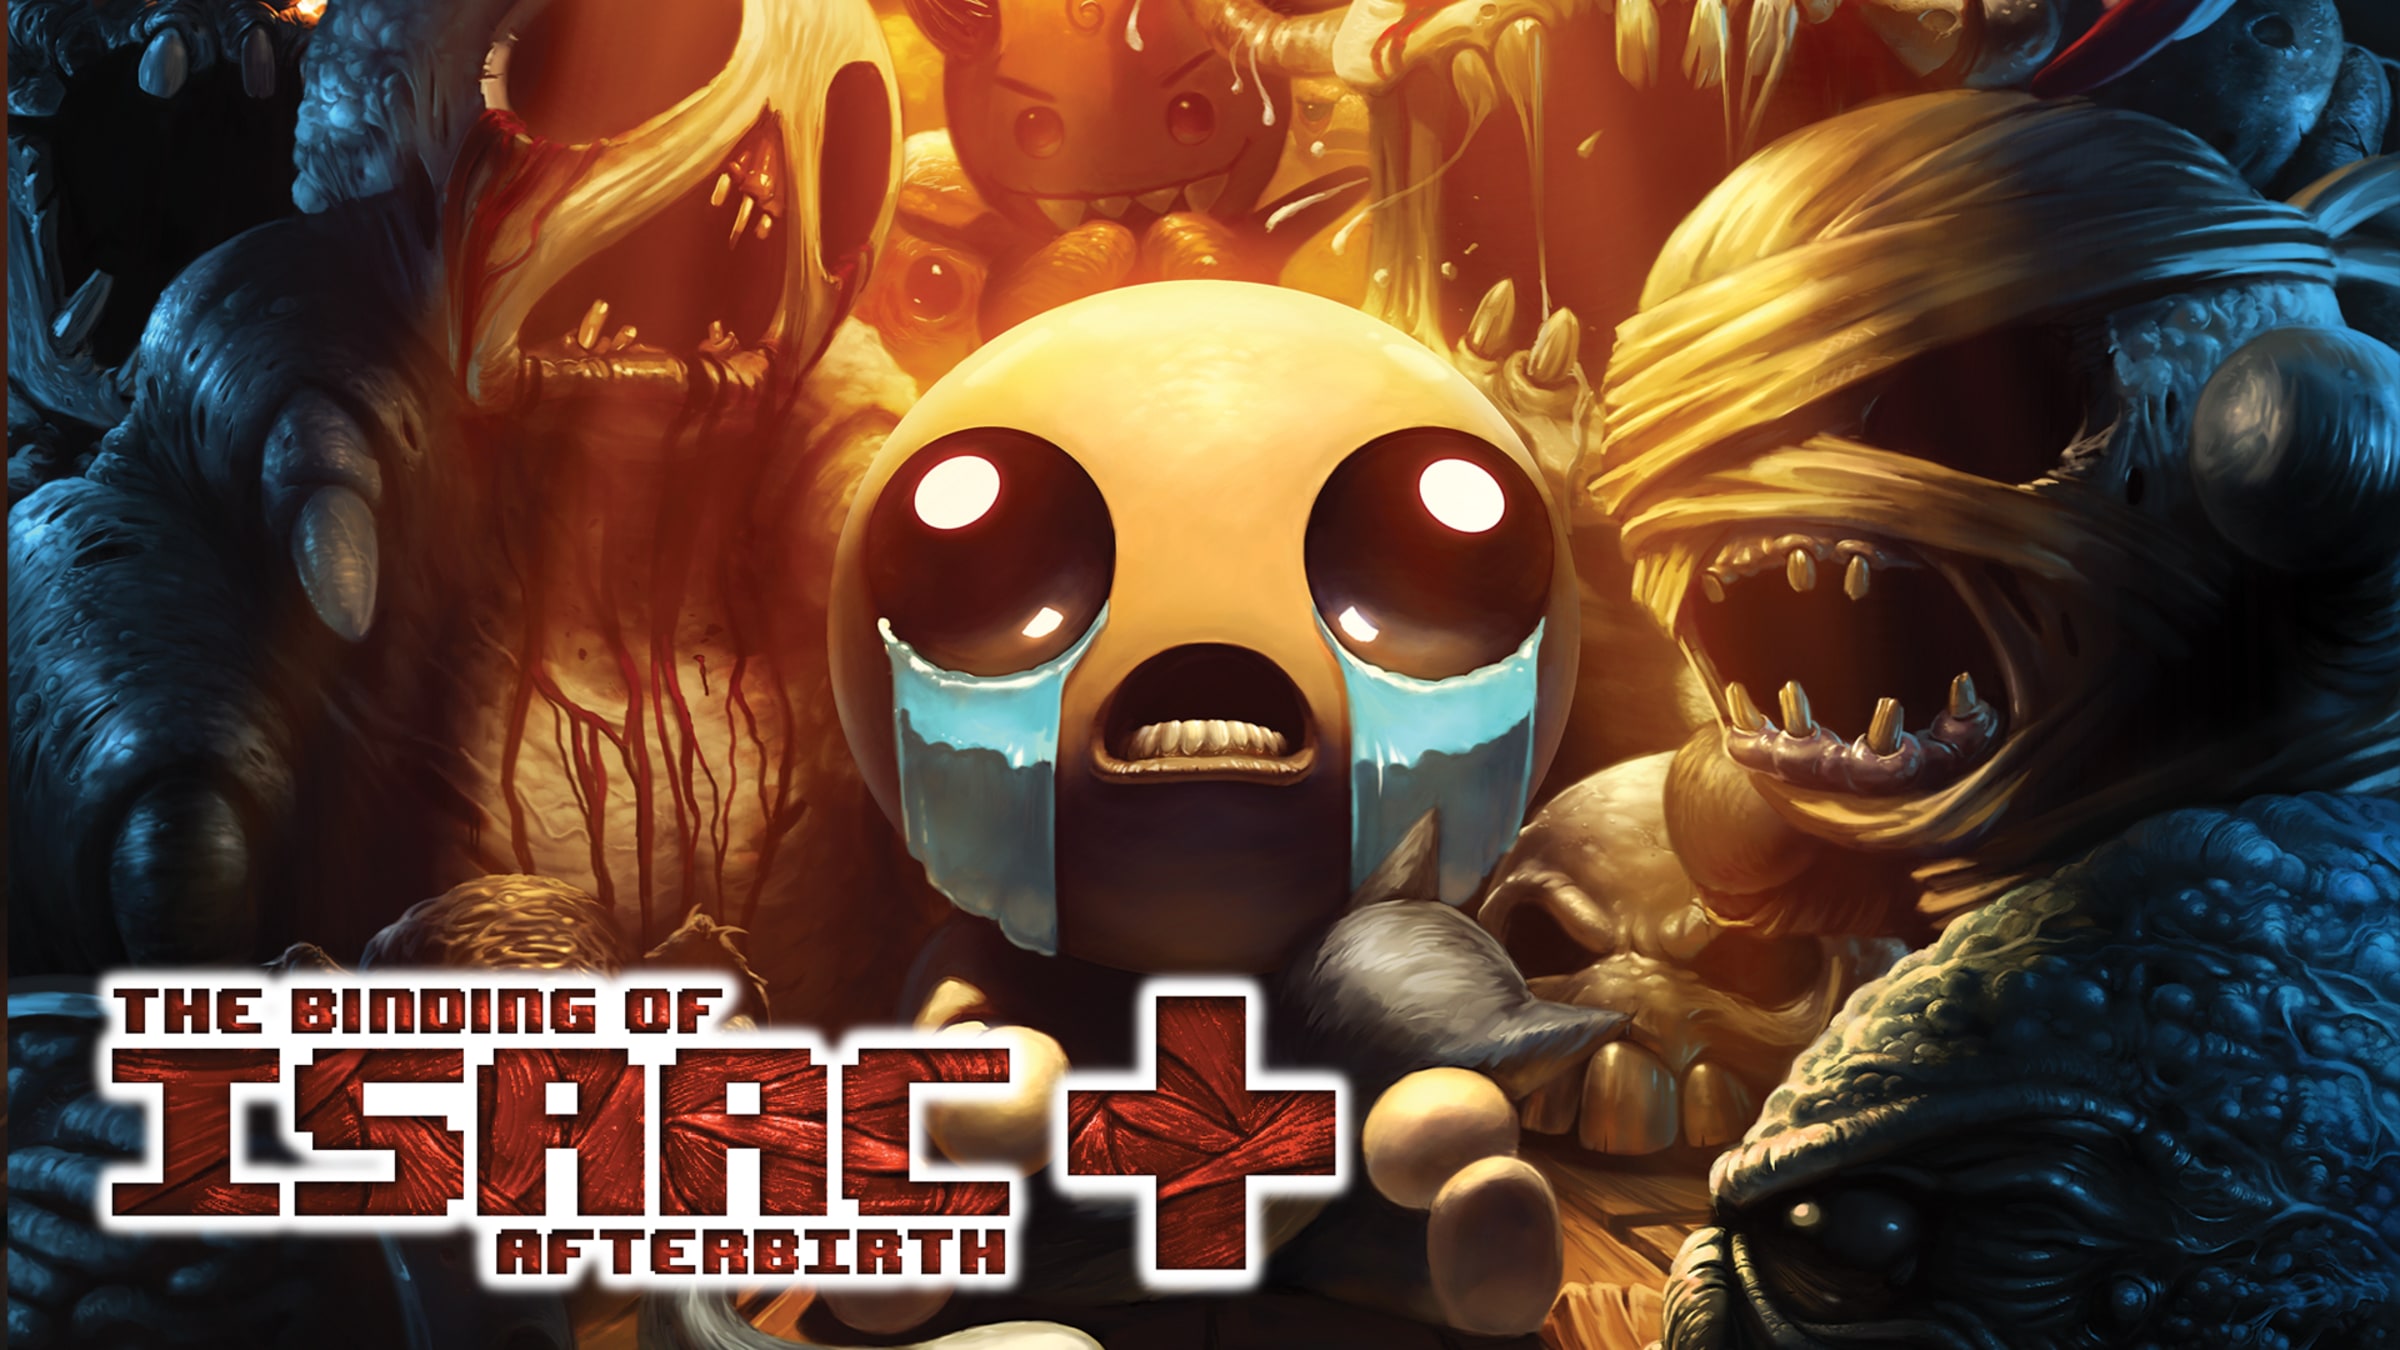 PIKII - The Binding of Isaac: Repentance for Nintendo Switch